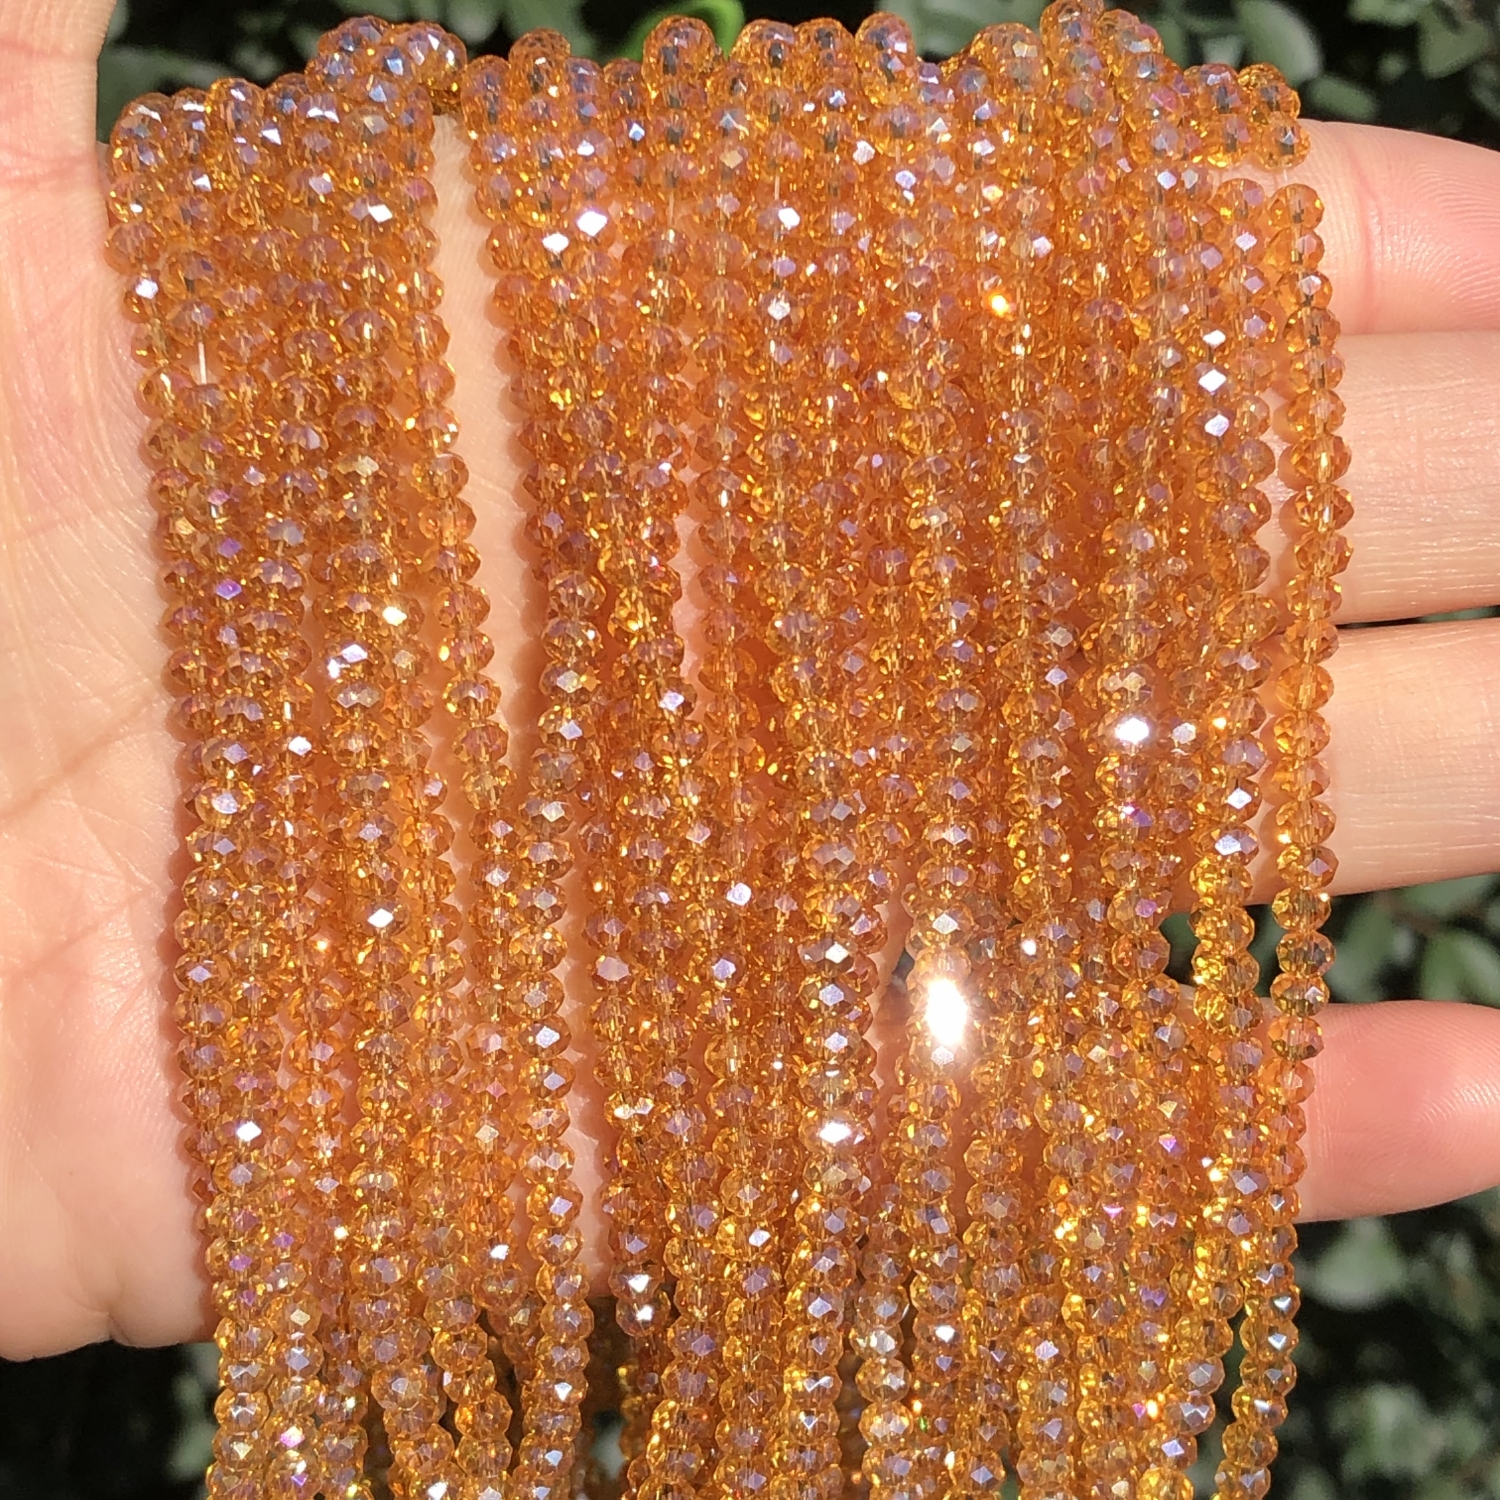 4mm Crystal clear czech glass rondelle spacer beads - approx. 130pc –  MayaHoney beads